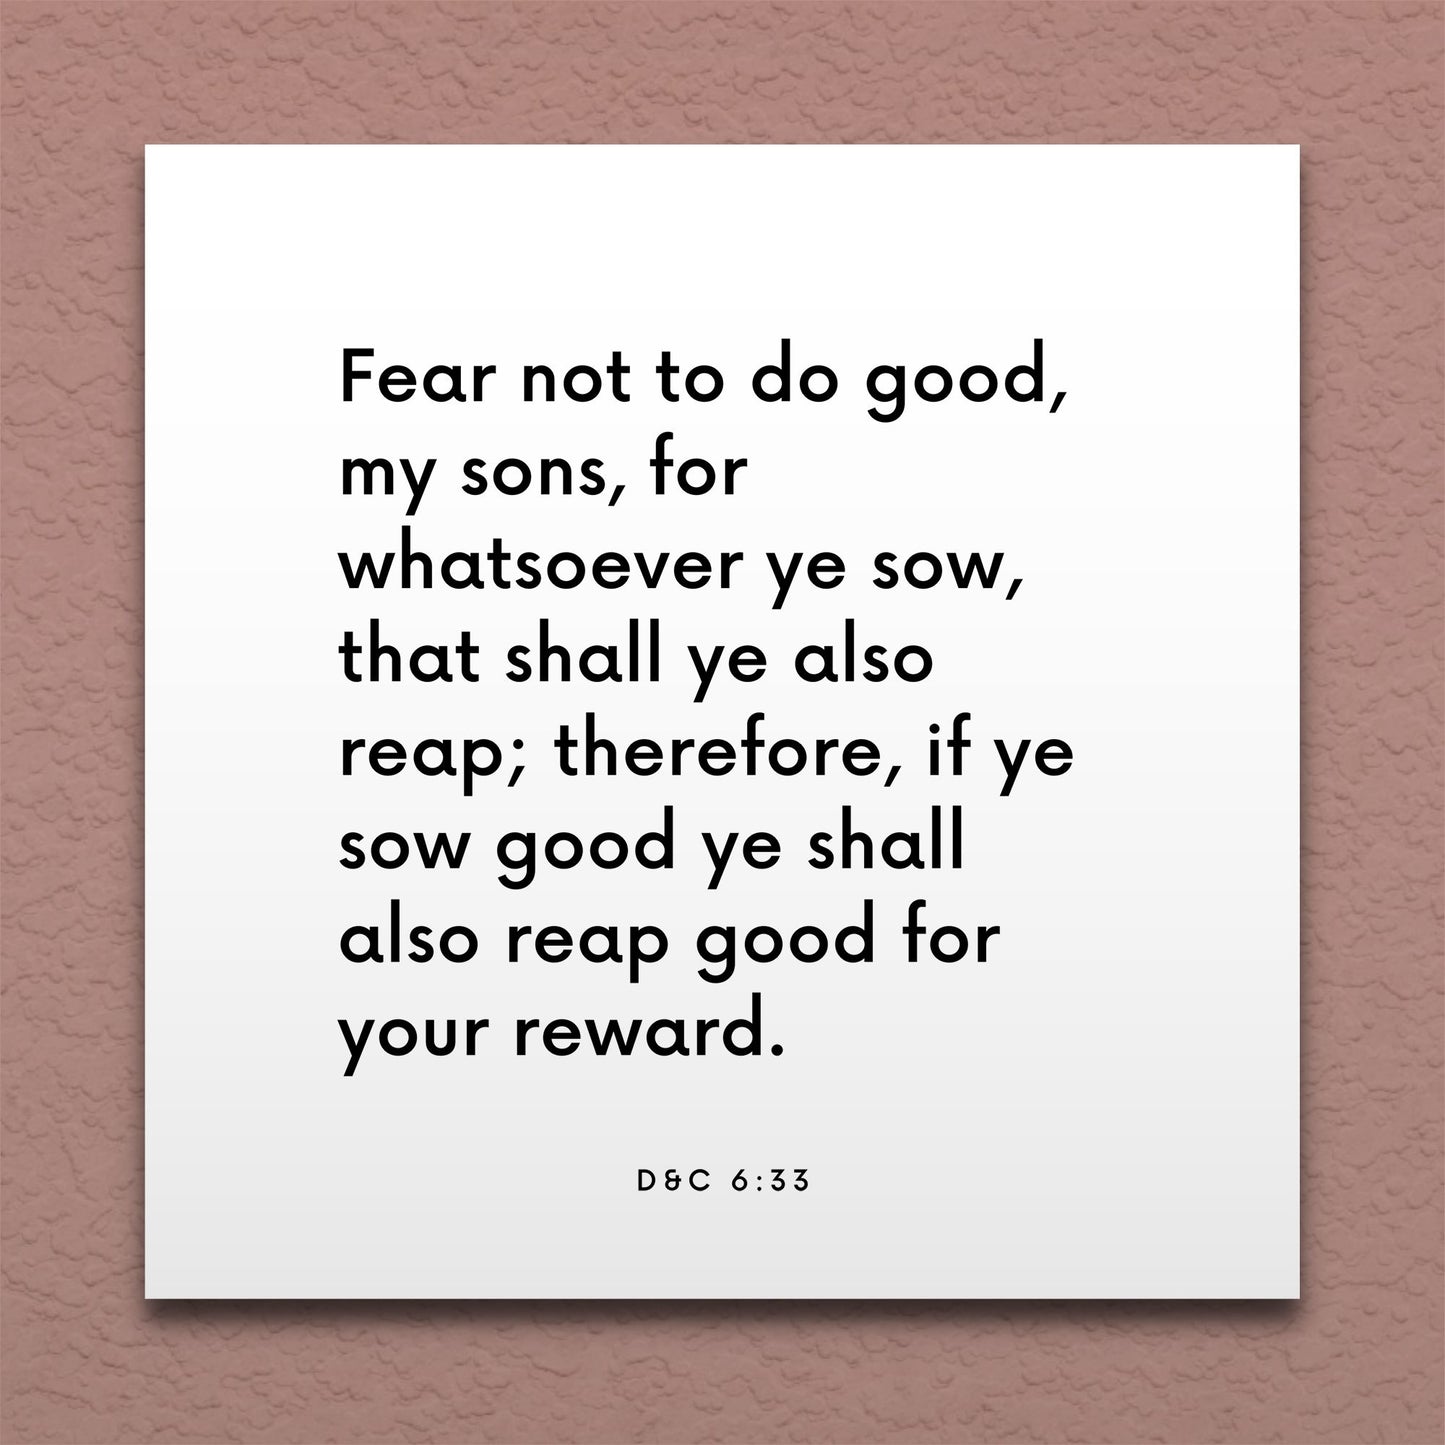 Wall-mounted scripture tile for D&C 6:33 - "Whatsoever ye sow, that shall ye also reap"